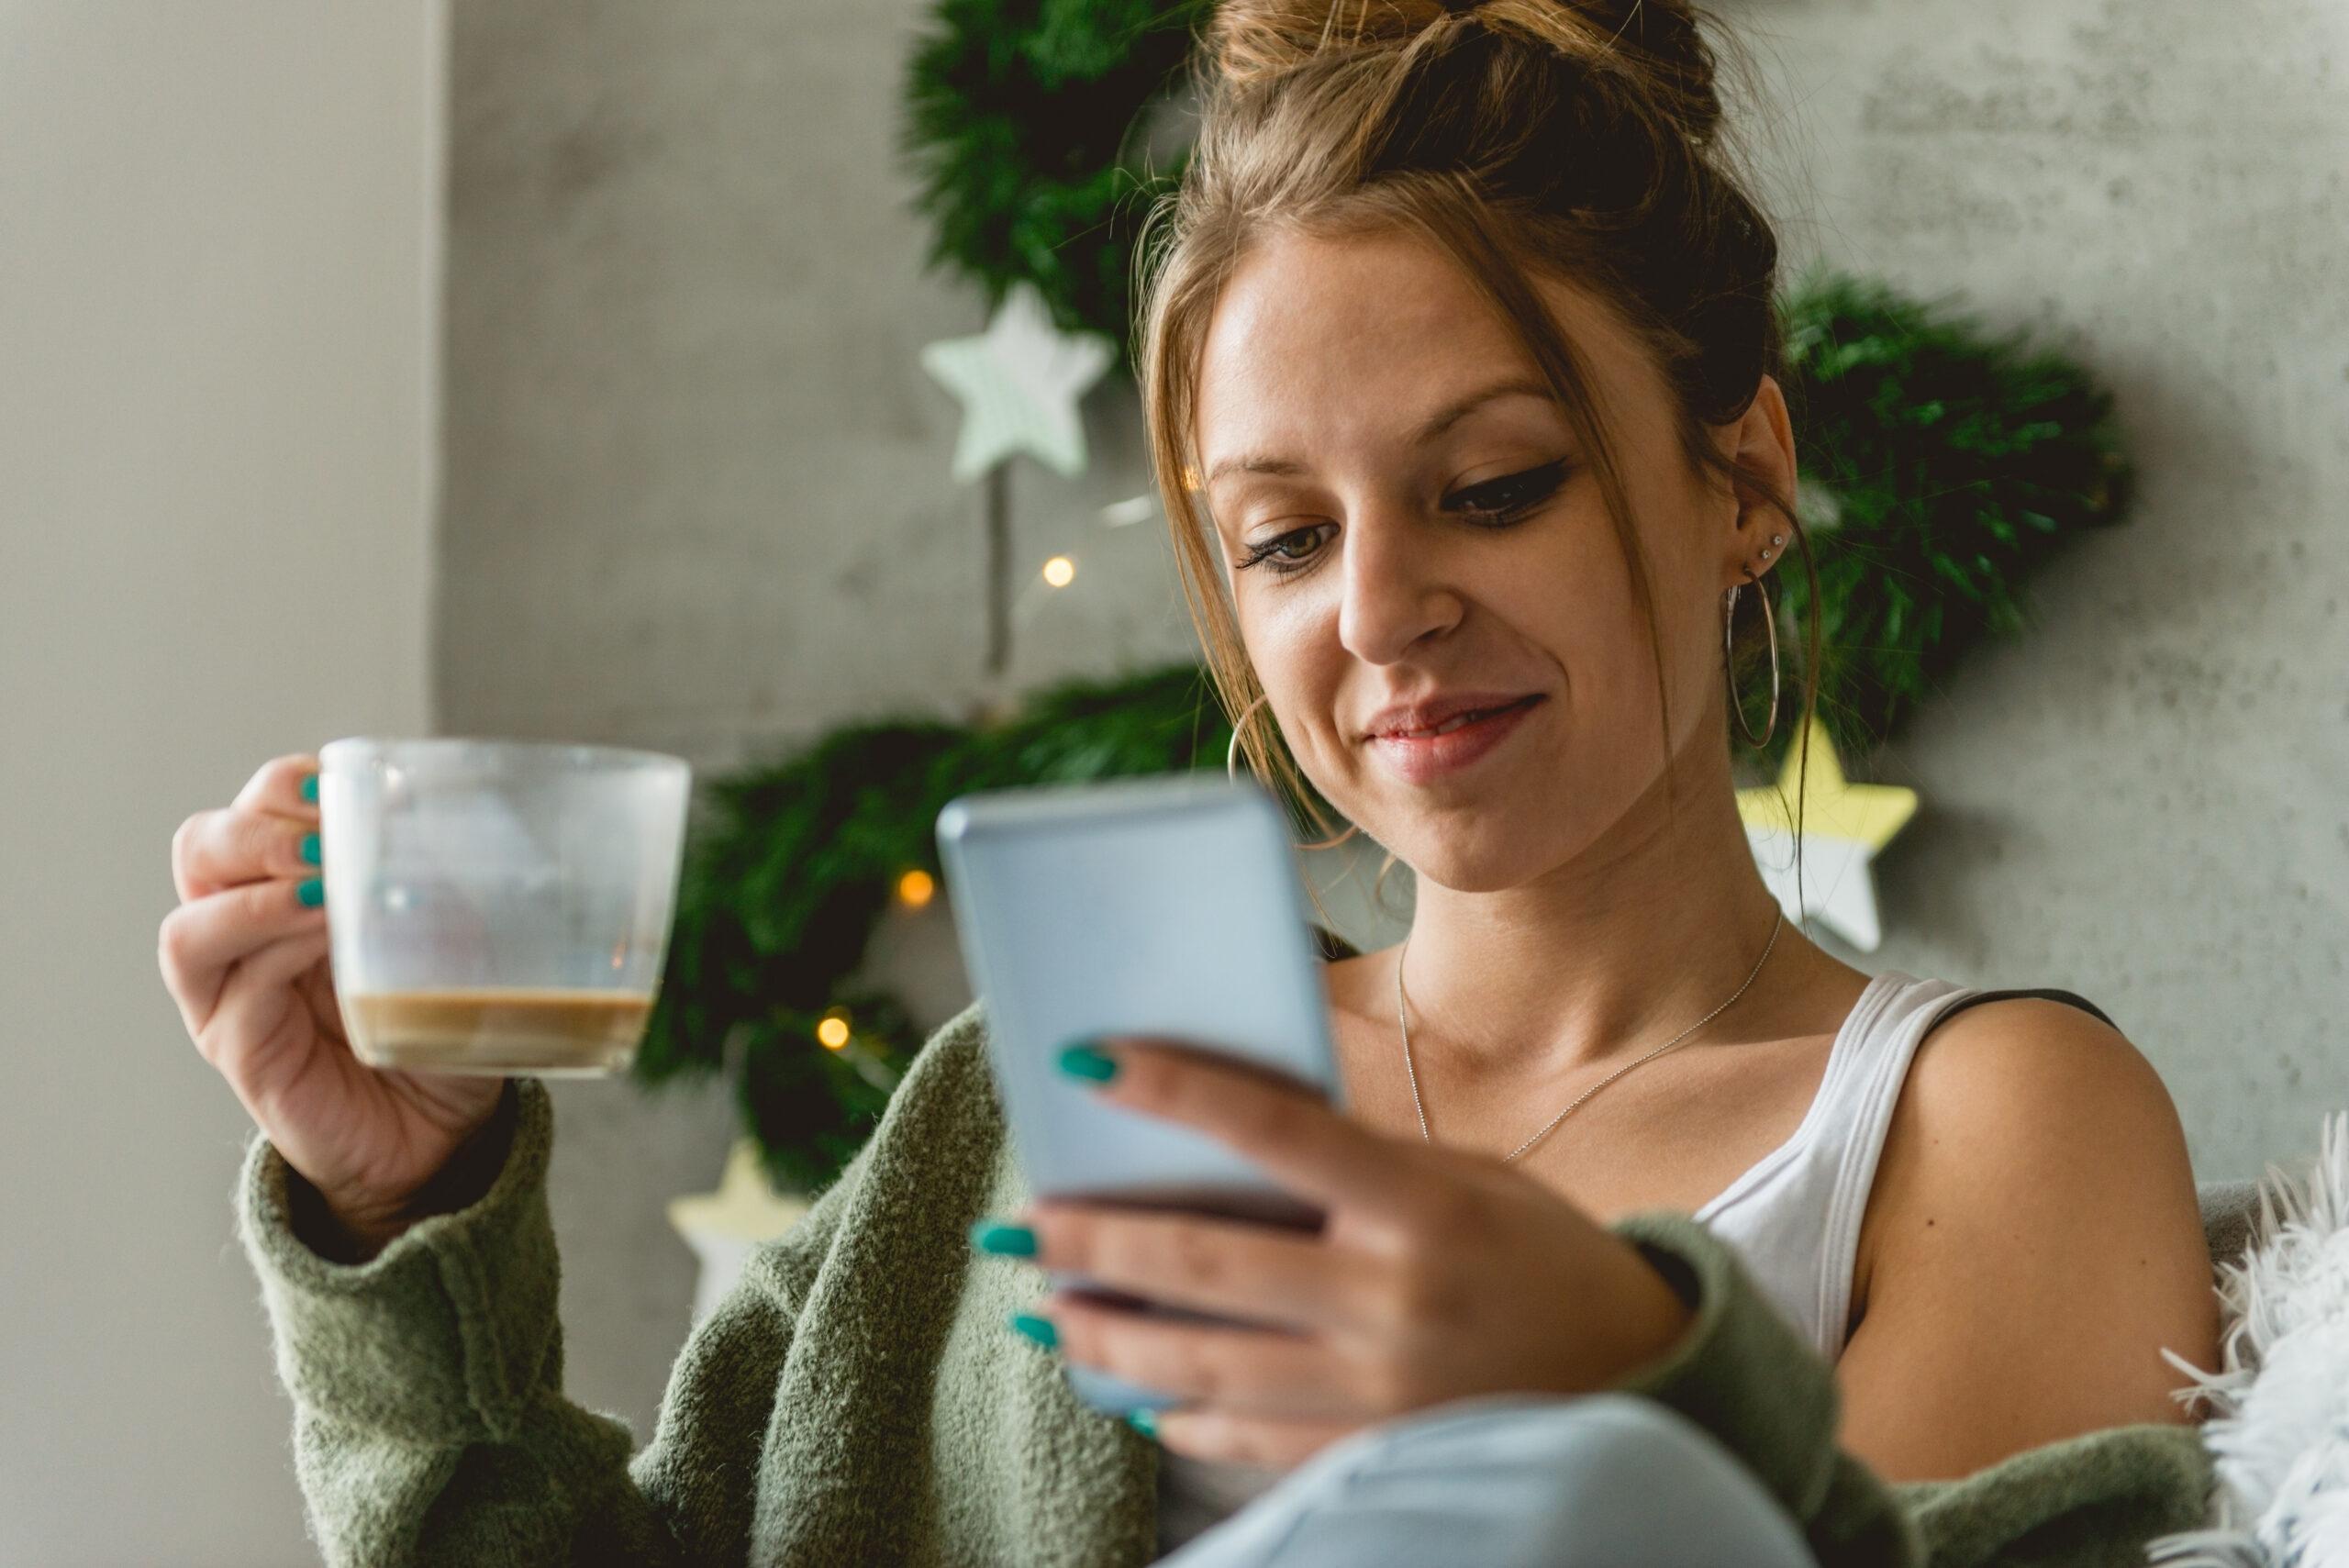 Woman checking her smartphone while drinking coffee early in the morning